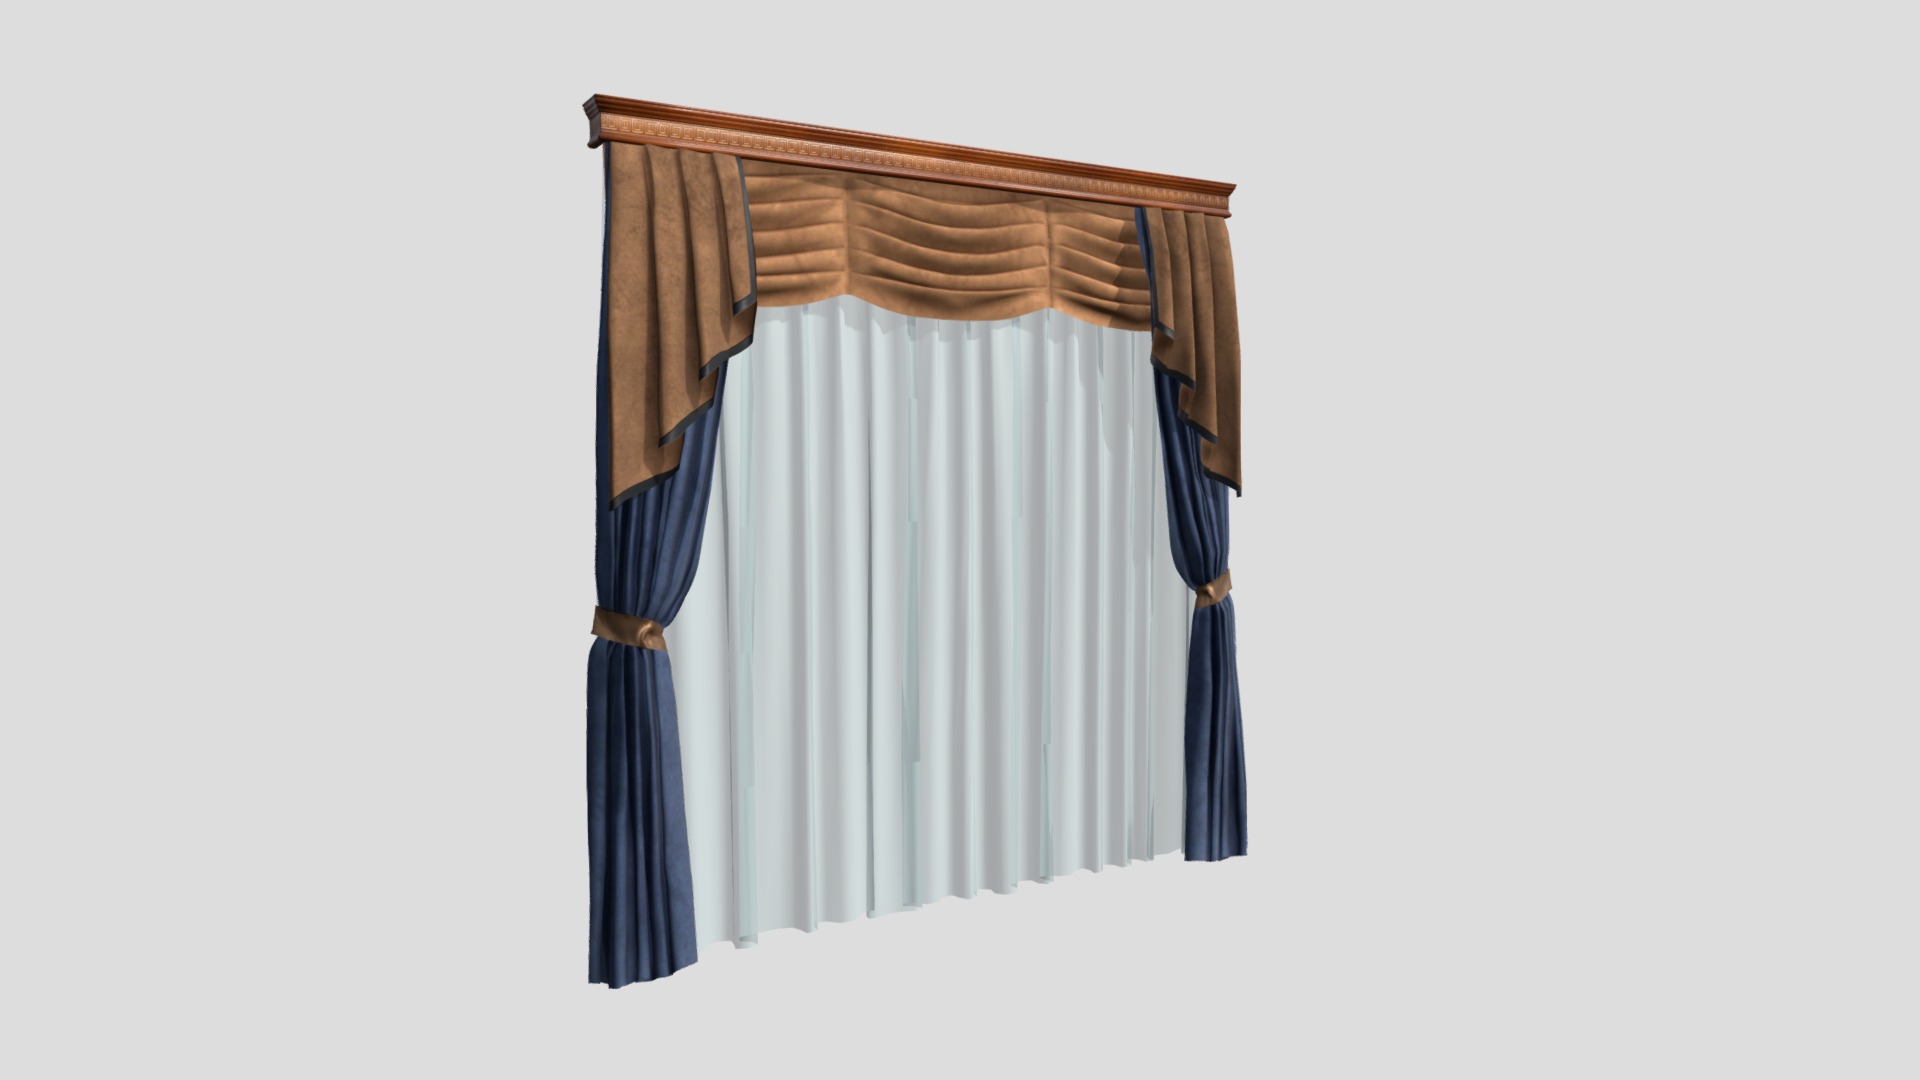 3D model №802 Curtain  3D low poly model for VR-projects - This is a 3D model of the №802 Curtain  3D low poly model for VR-projects. The 3D model is about a pair of blue and white curtains.